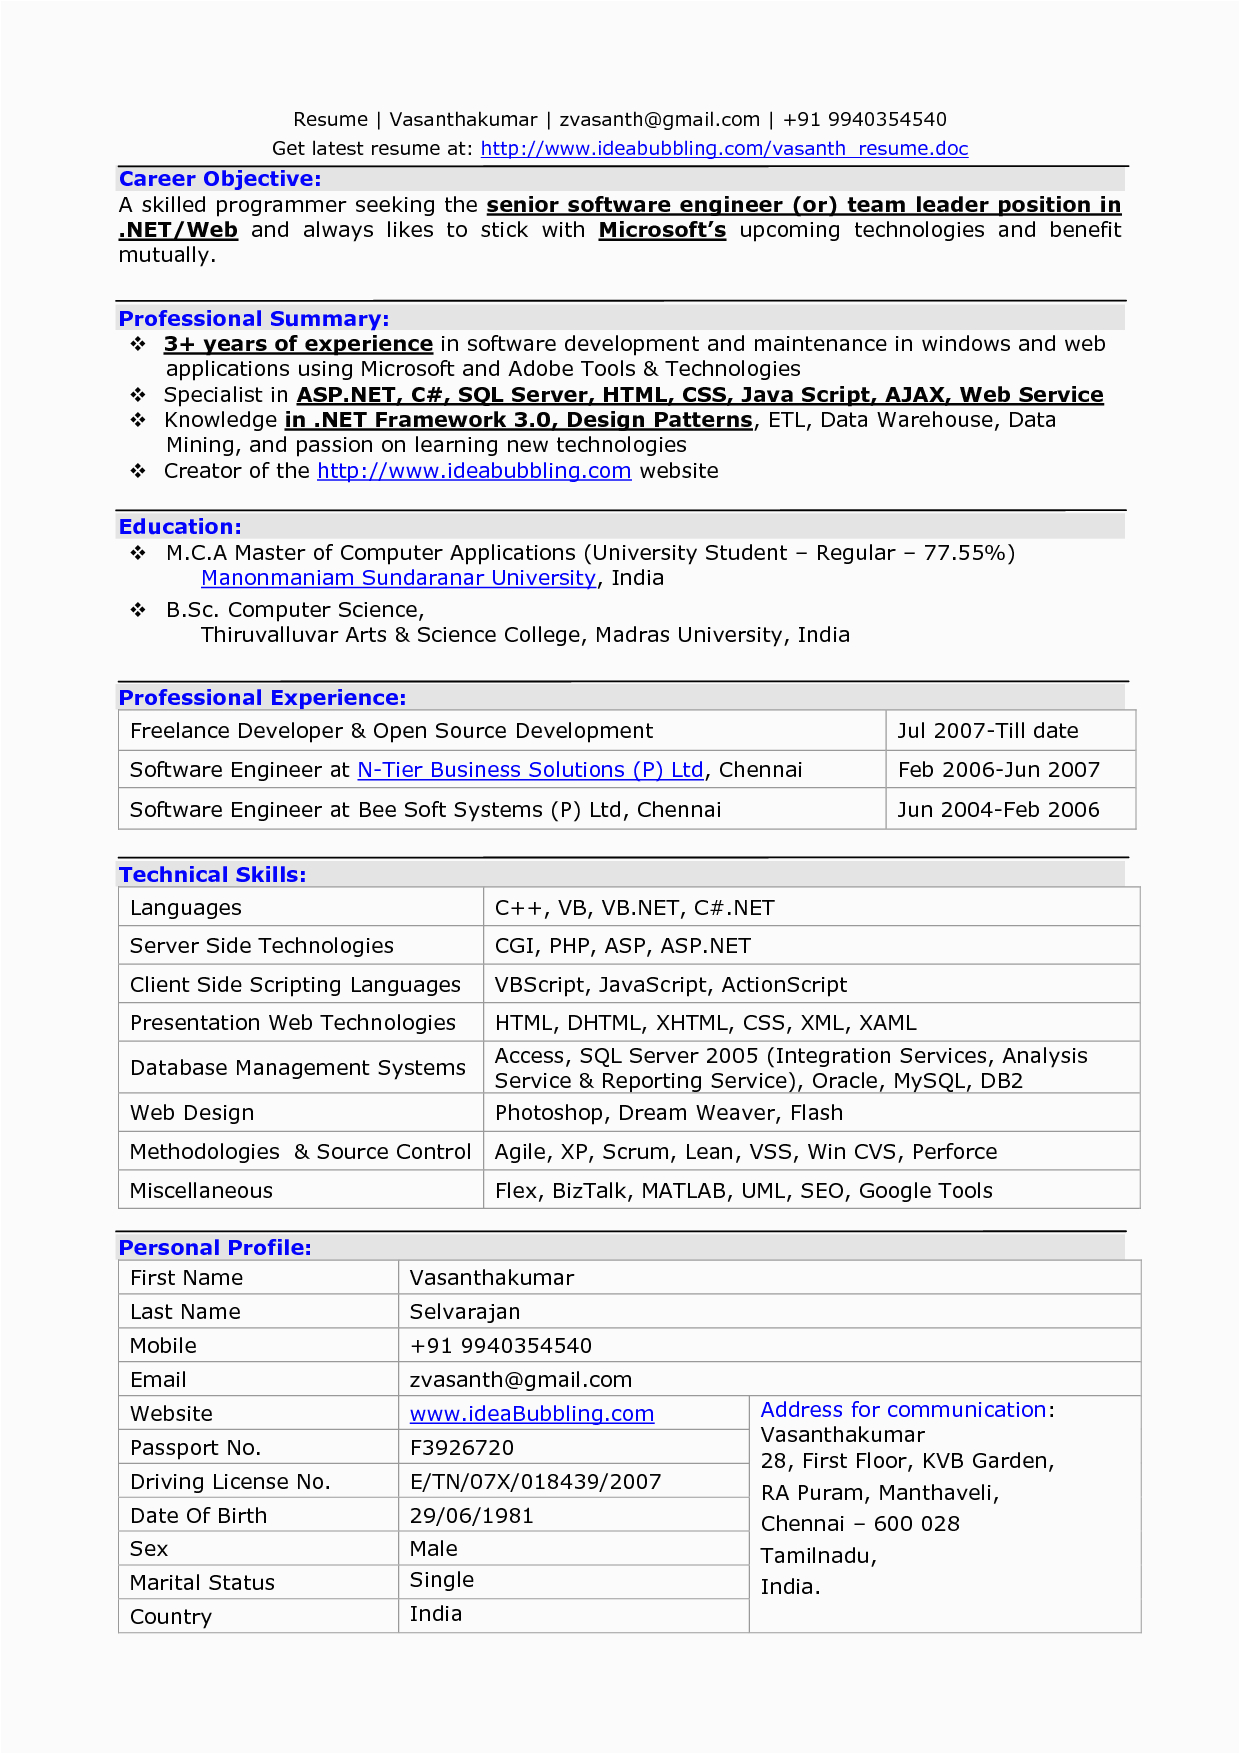 Sample Resume format for Experienced software Developer Resume format for 6 Months Experienced software Engineer